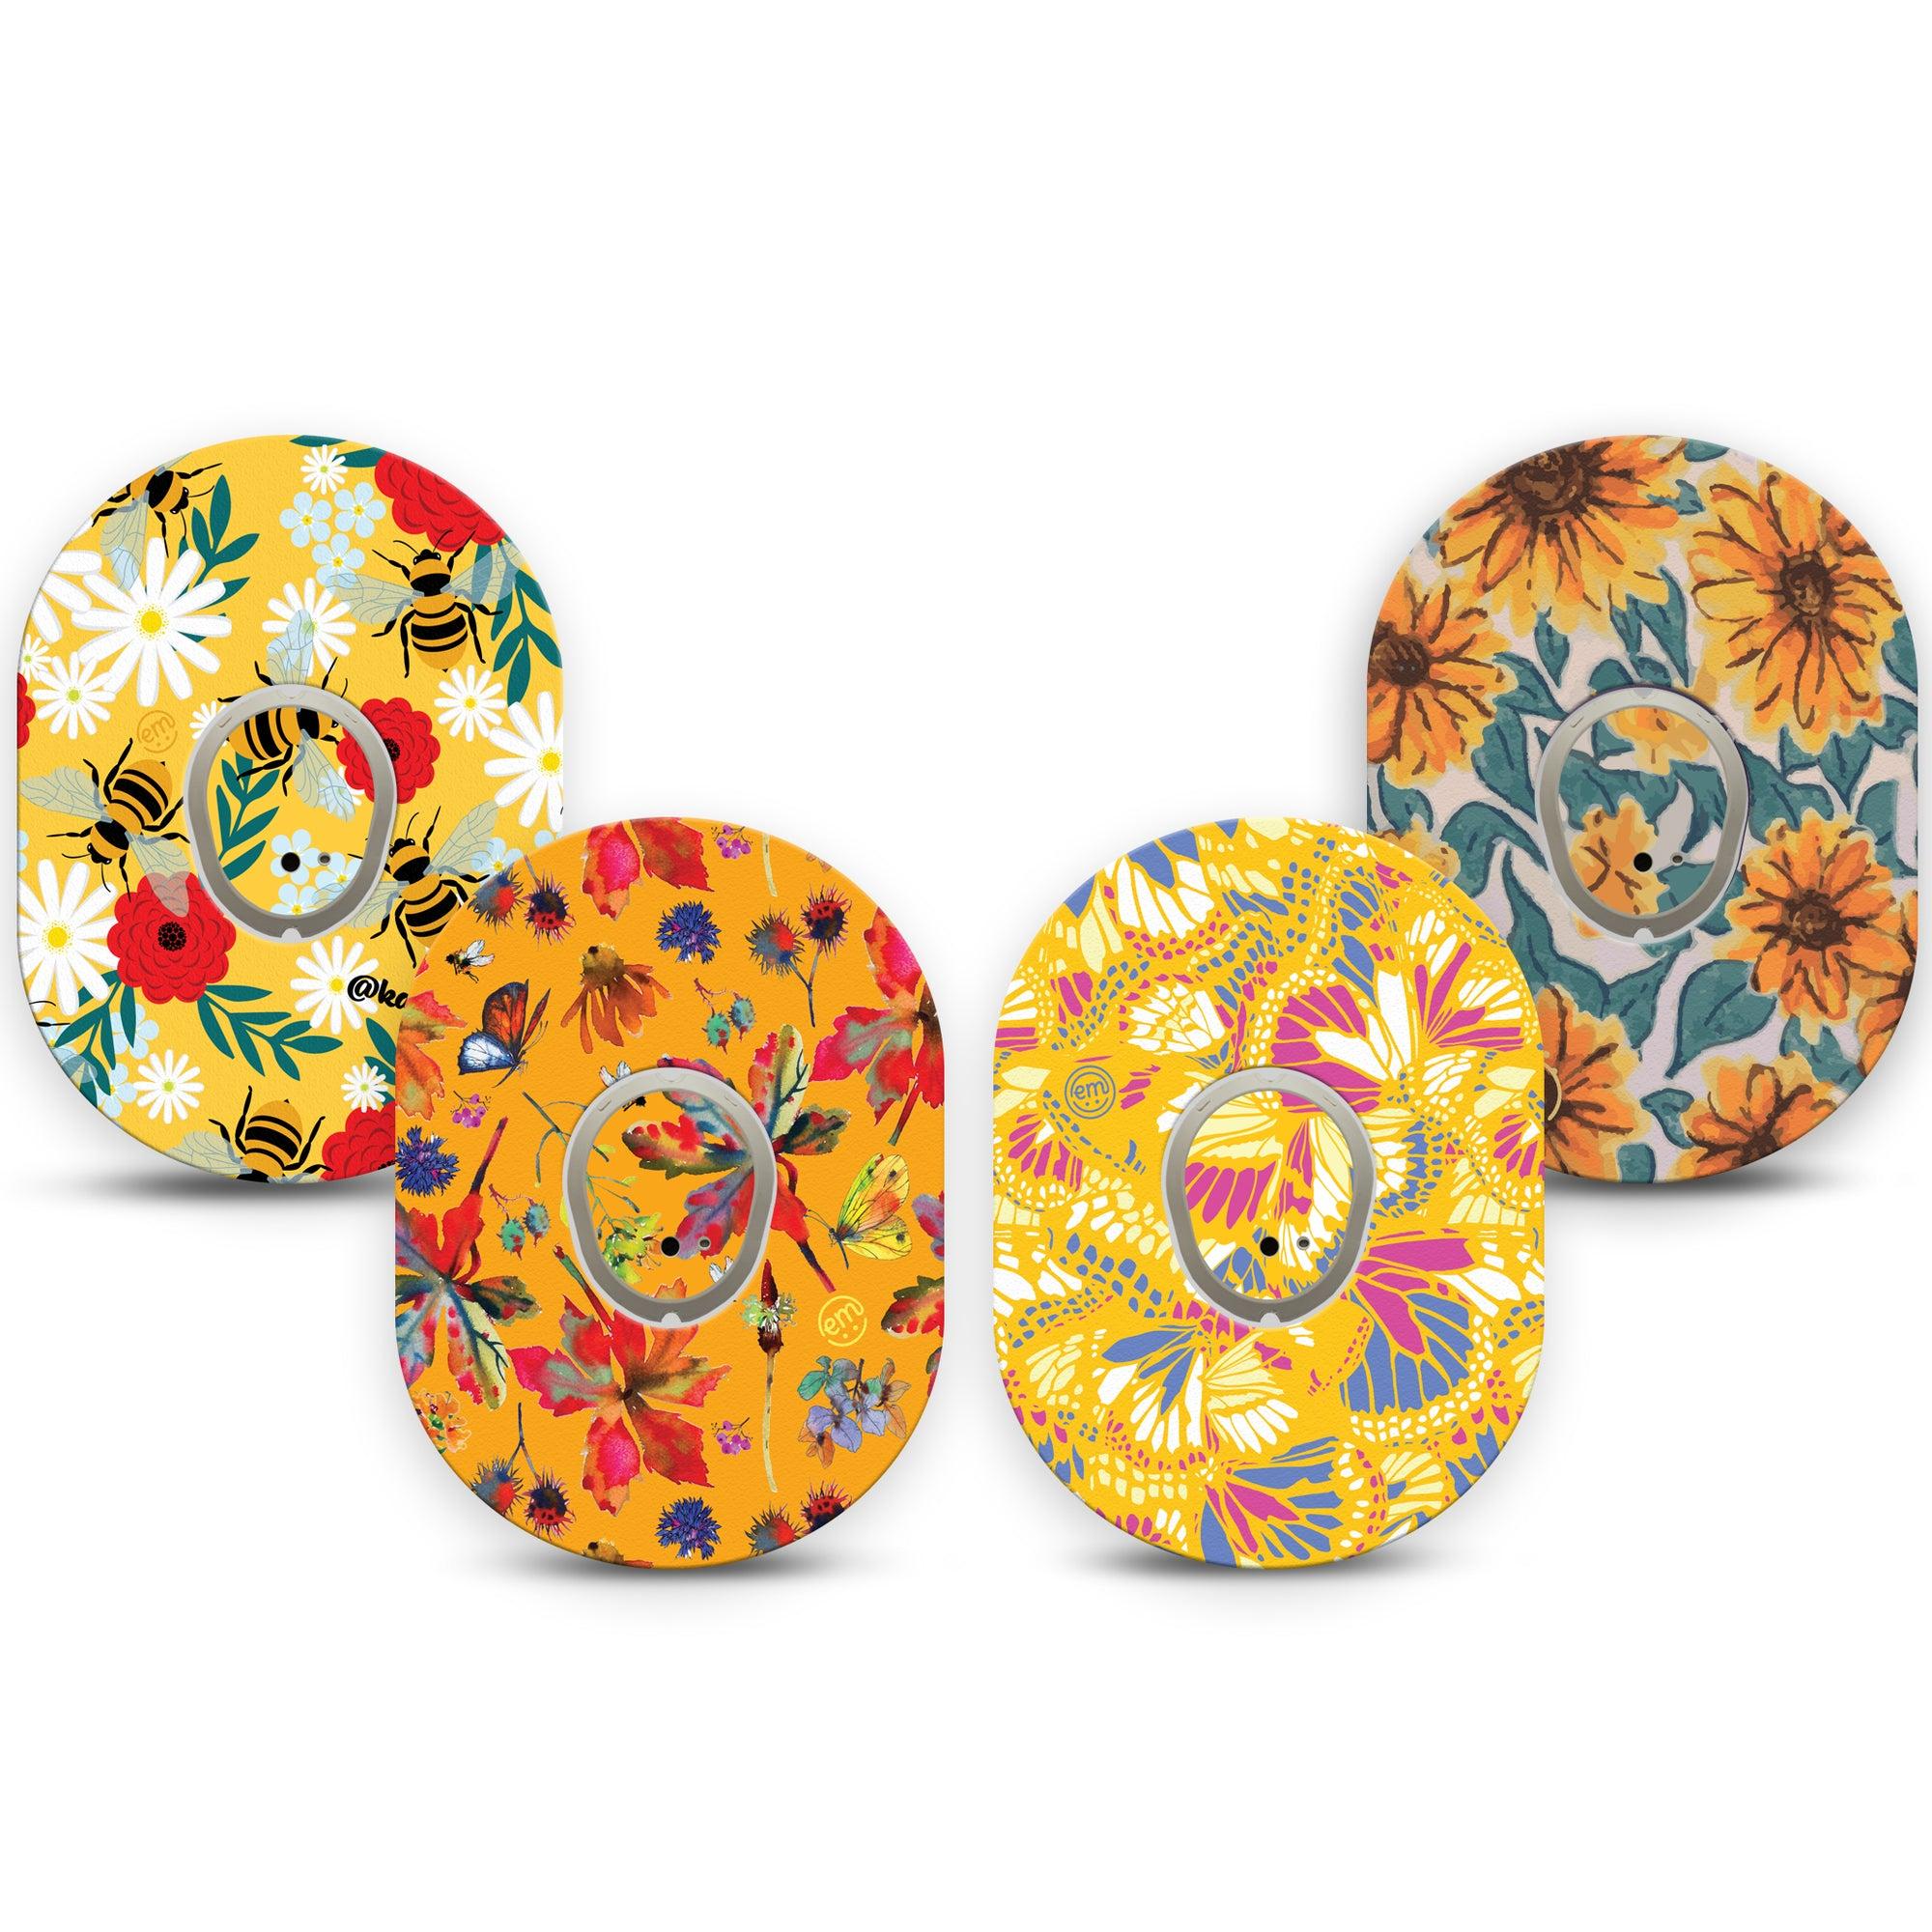 ExpressionMed Golden Variety Pack Dexcom G7 Transmitter Sticker, Florals And Insects Inspired, Dexcom G7 Transmitter Vinyl Stickers, With Matching Dexcom G7 Tapes, CGM Plaster Patch Design, 